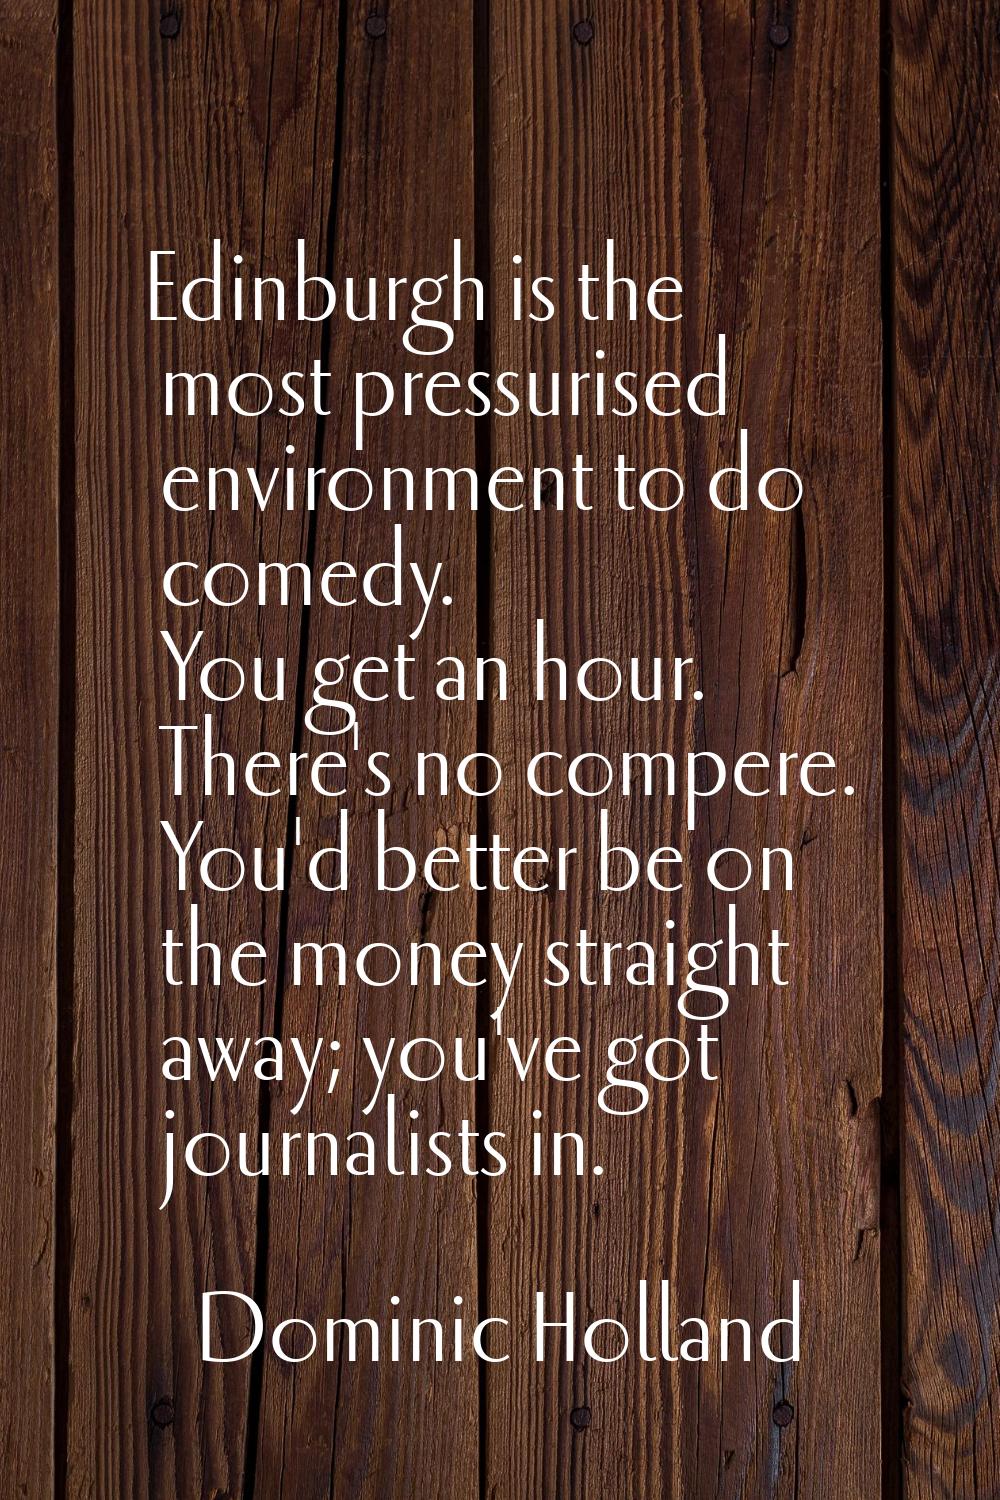 Edinburgh is the most pressurised environment to do comedy. You get an hour. There's no compere. Yo